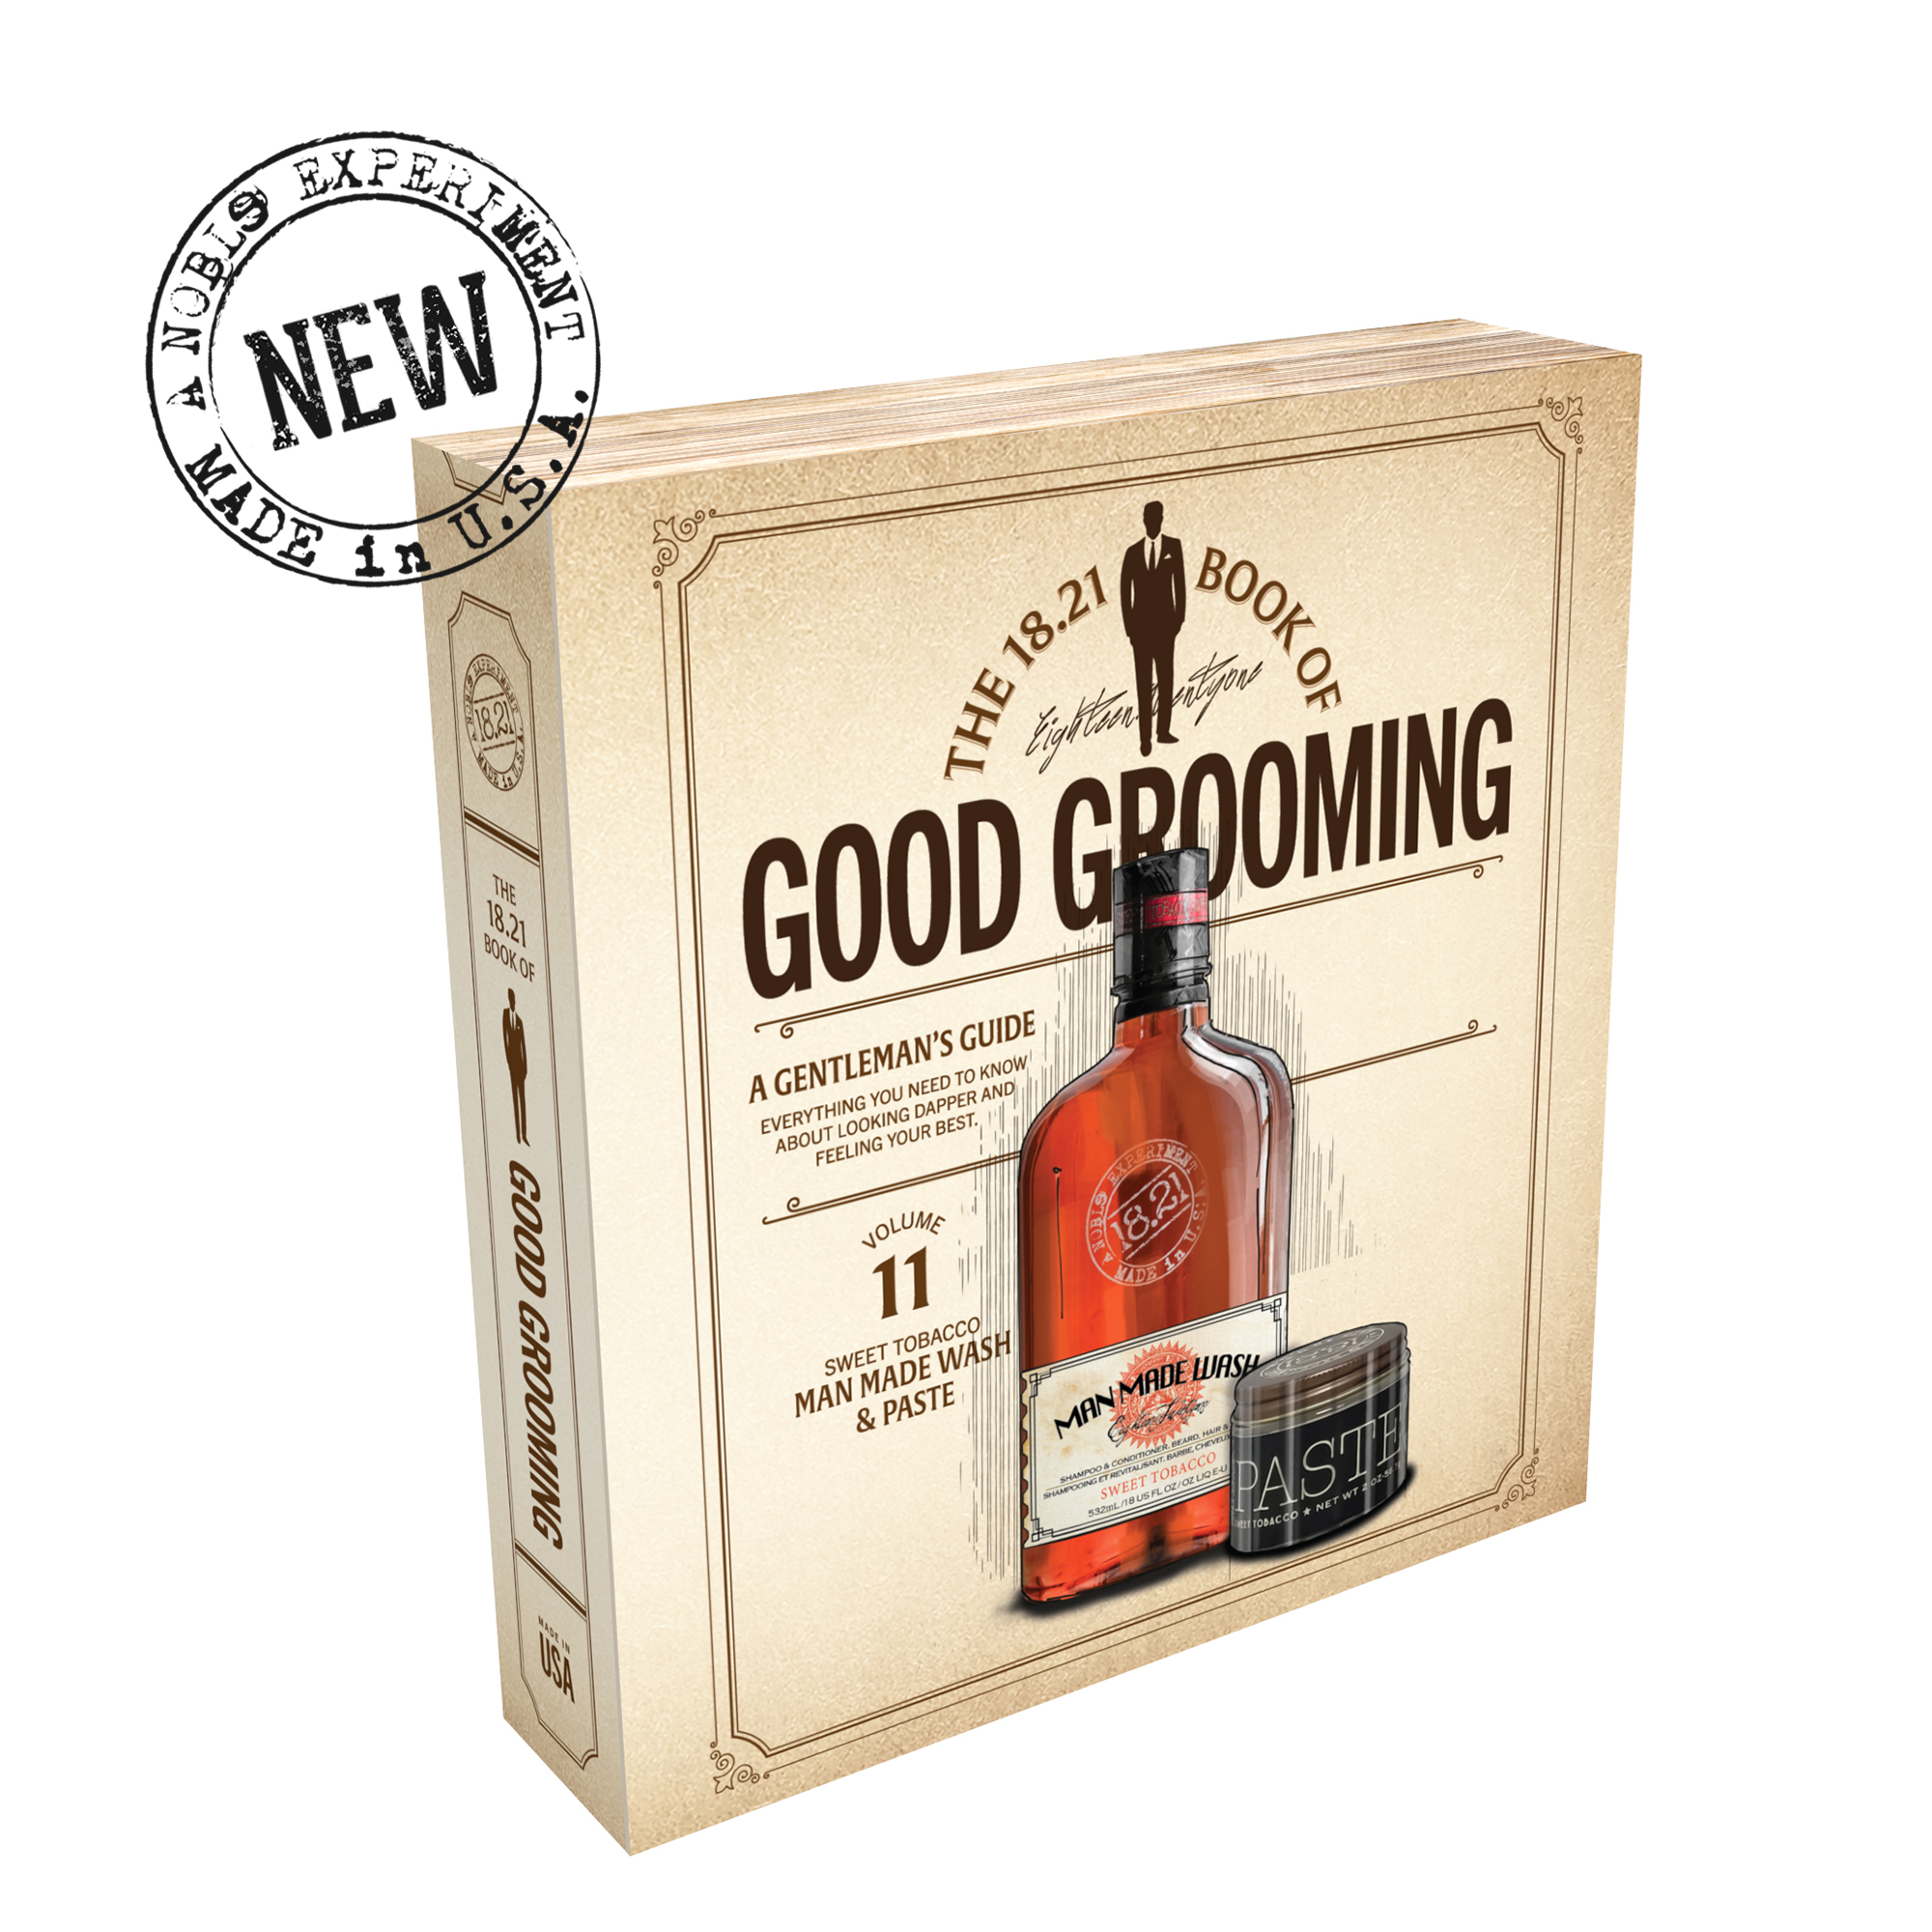 18.21 Man Made Book of Good Grooming Volume 11 Giftset:  18ozMan Made Wash and Hair Styling Paste in Sweet Tobacco Paste